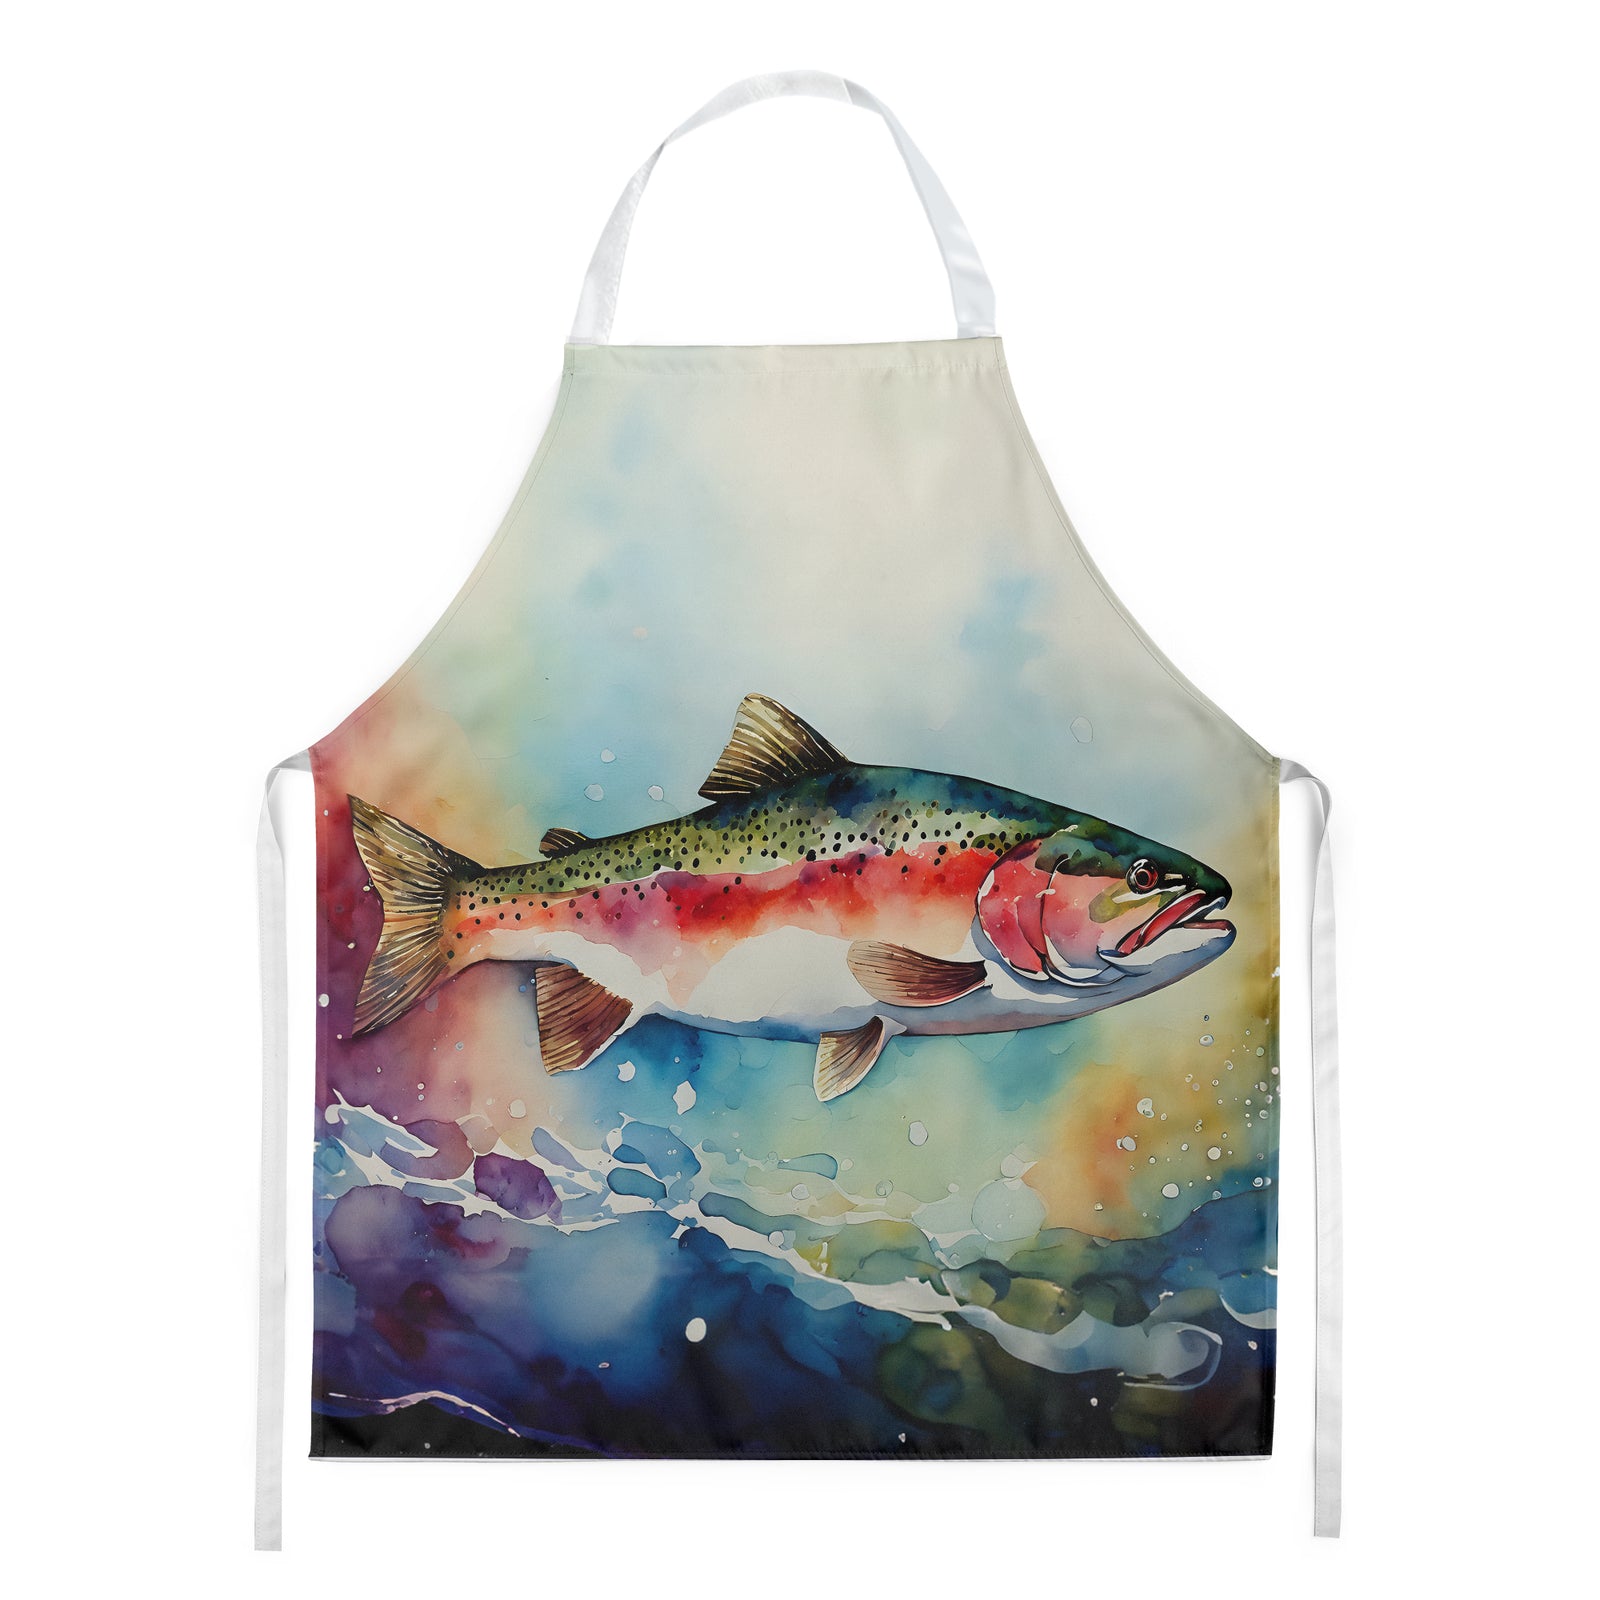 Buy this Rainbow Trout Apron